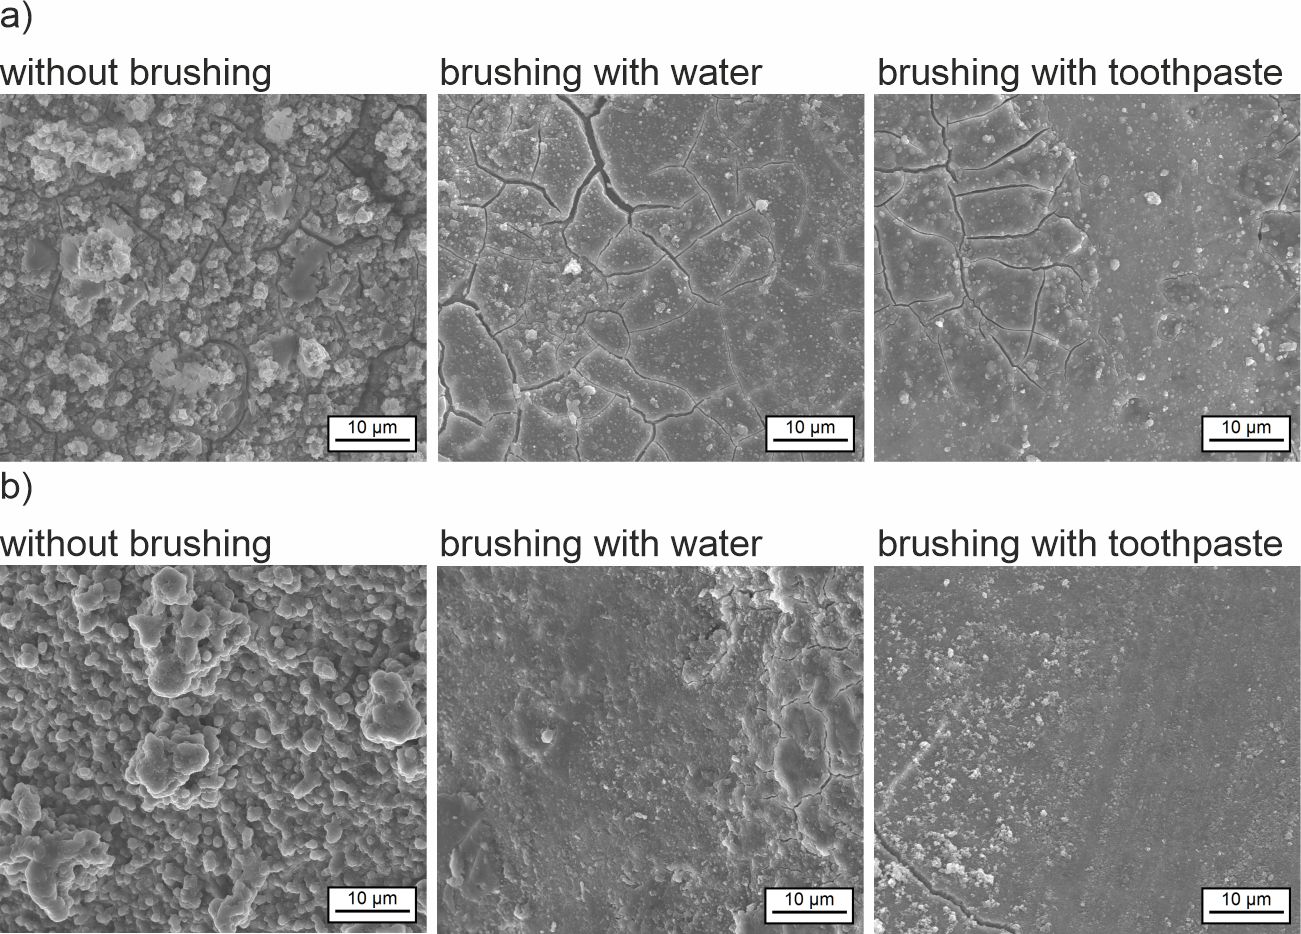 After drinking pure black tea (a) during CHX treatment, significantly stronger staining can be seen under the scanning electron microscope in comparison to drinking the beverage diluted with milk (b). 